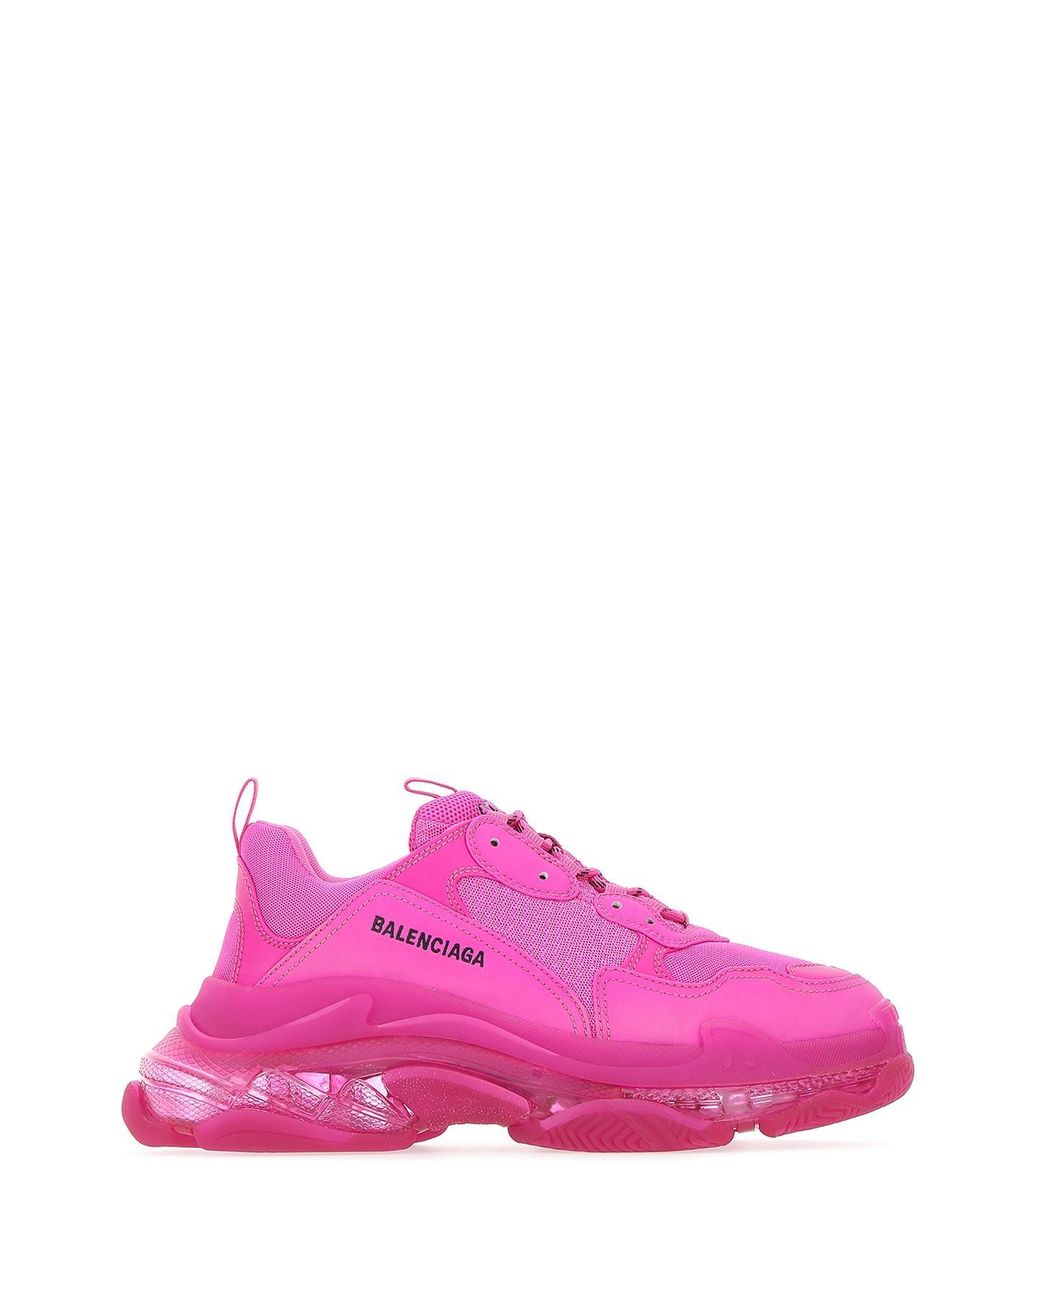 Balenciaga Suede Triple S Clear Sole Sneakers in Pink for Men - Save 28 ...